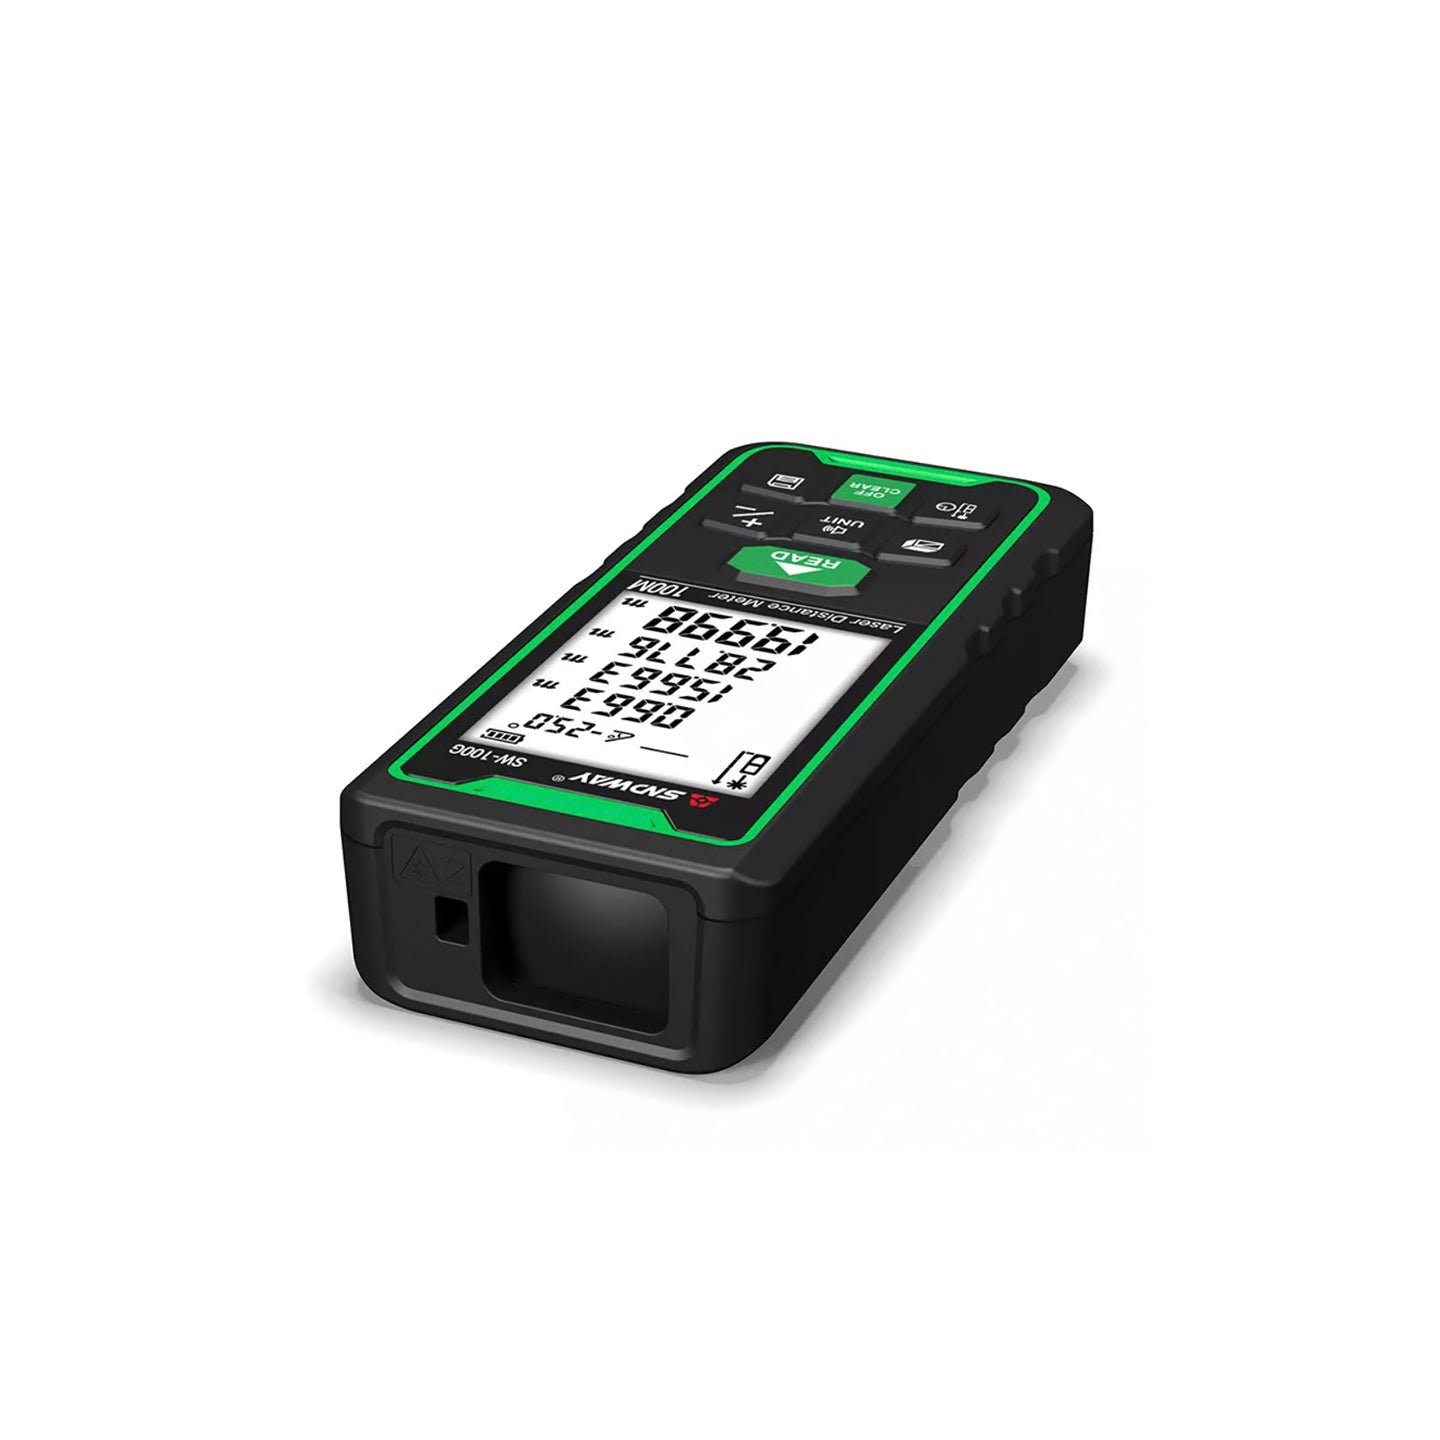 Sndway SW-100G Outdoor Green Light Laser Distance Meter 100M with Volume & Area Measurement, Angle / Height Calculations